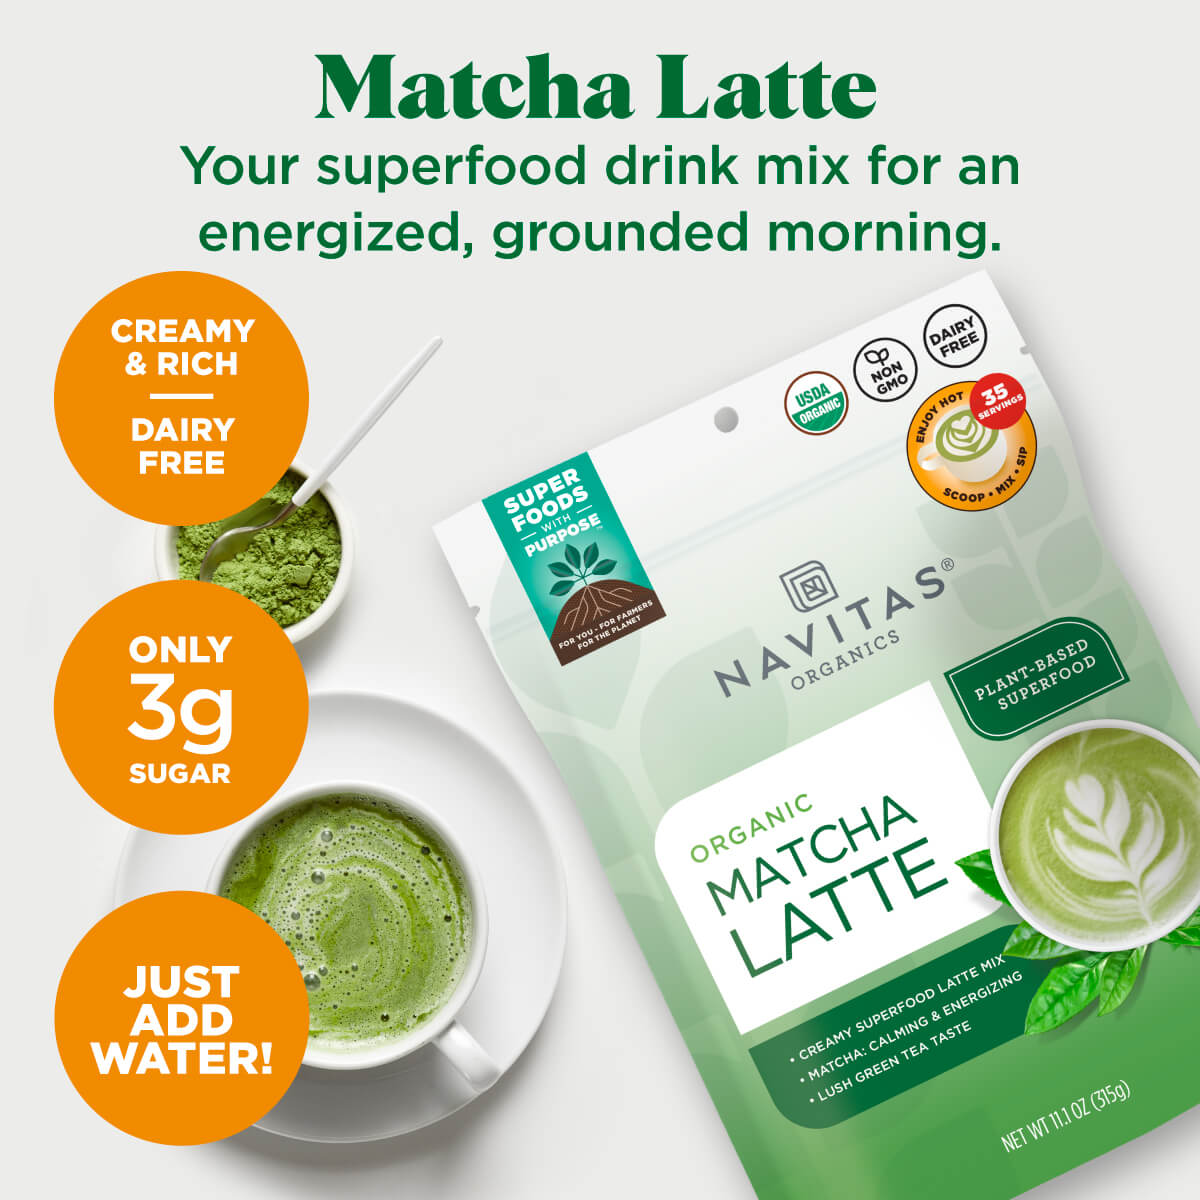 Navitas Organics Matcha Latte is your superfood drink mix for an energized, grounded morning. Creamy & rich, dairy free, only 3g sugar, just add water!